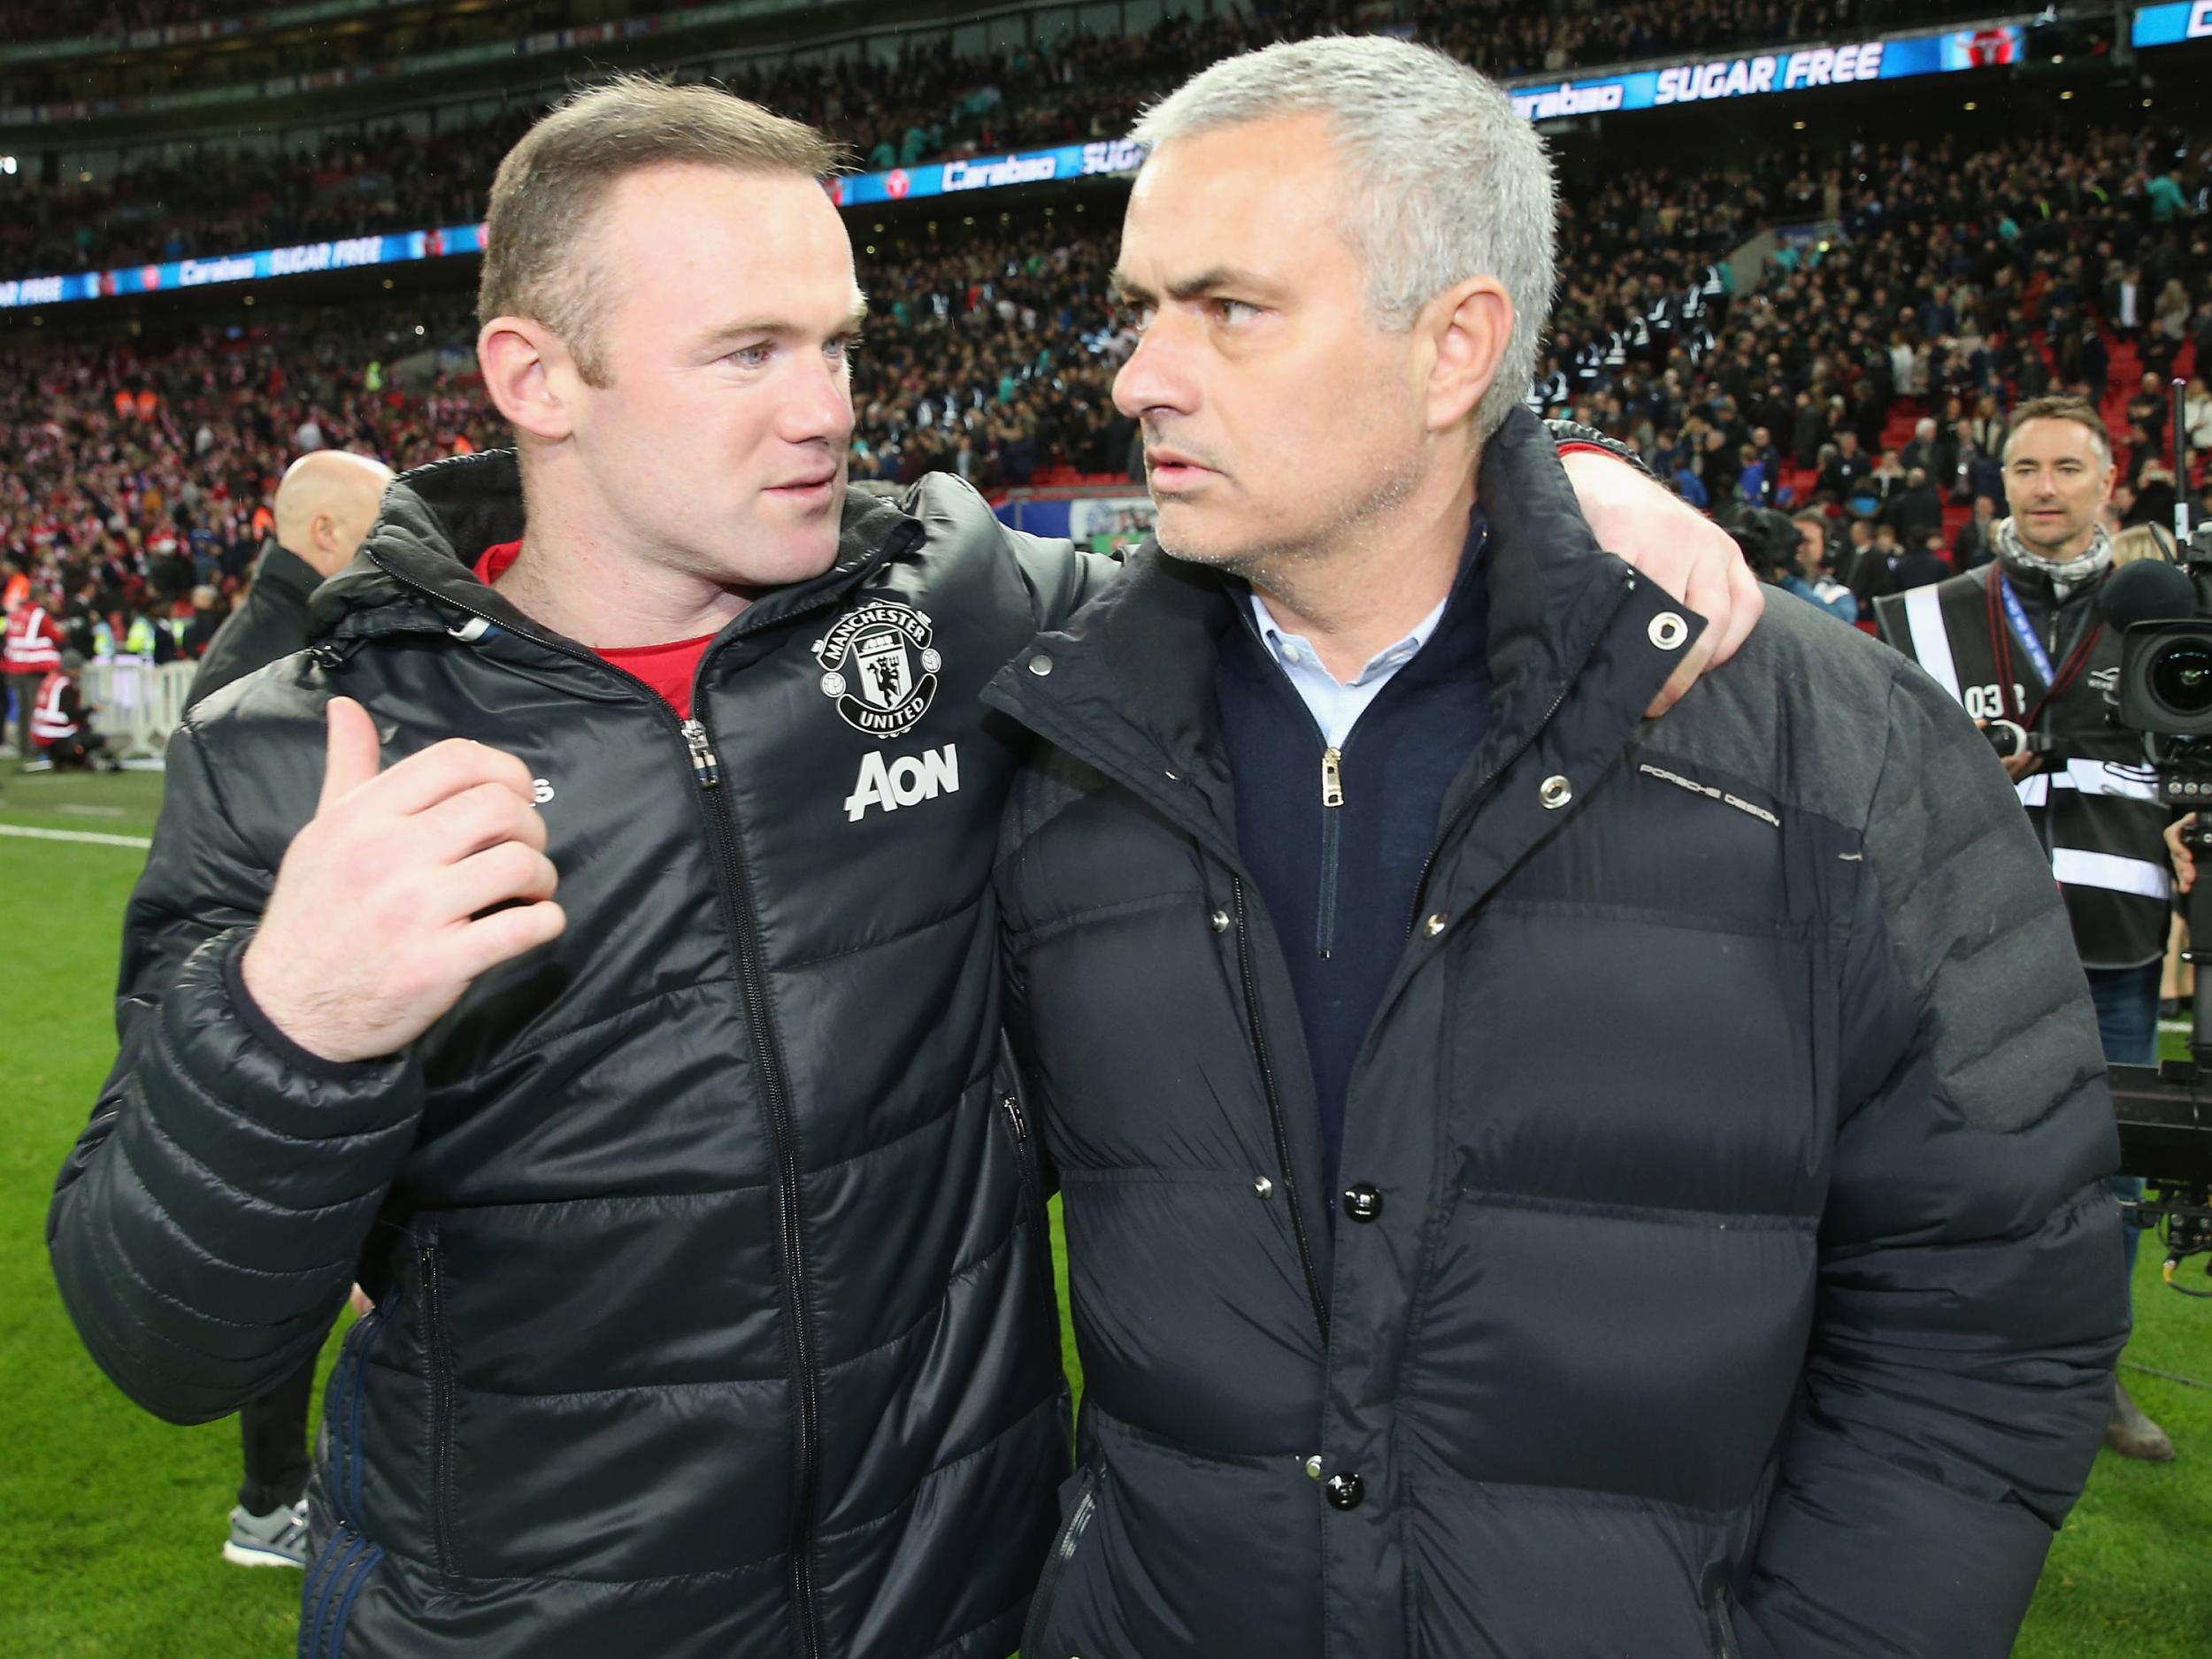 Mourinho and his captain Wayne Rooney celebrate their cup final win